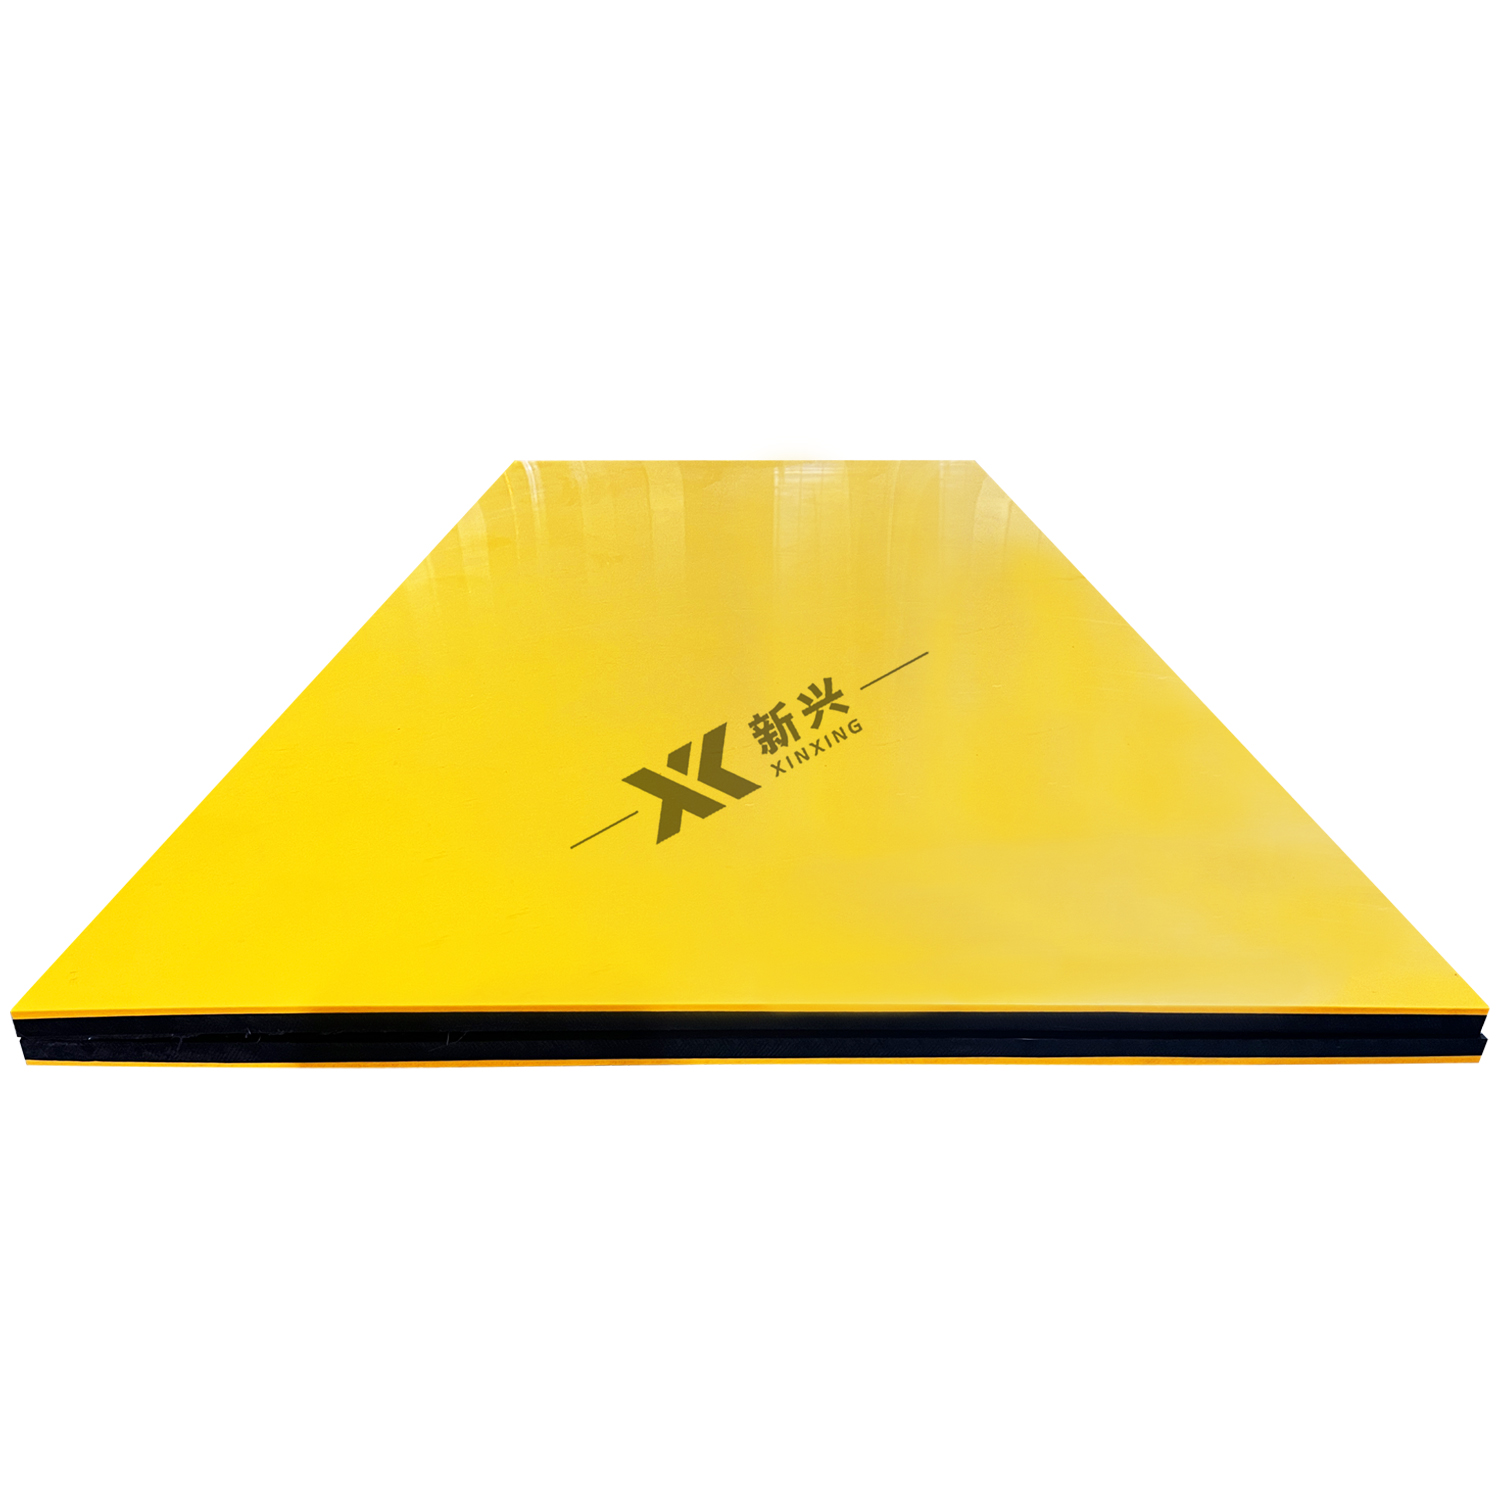 layer HDPE sheet colored/Two colors three layers extrude HDPE sheets / sandwich 3 layers double hdpe